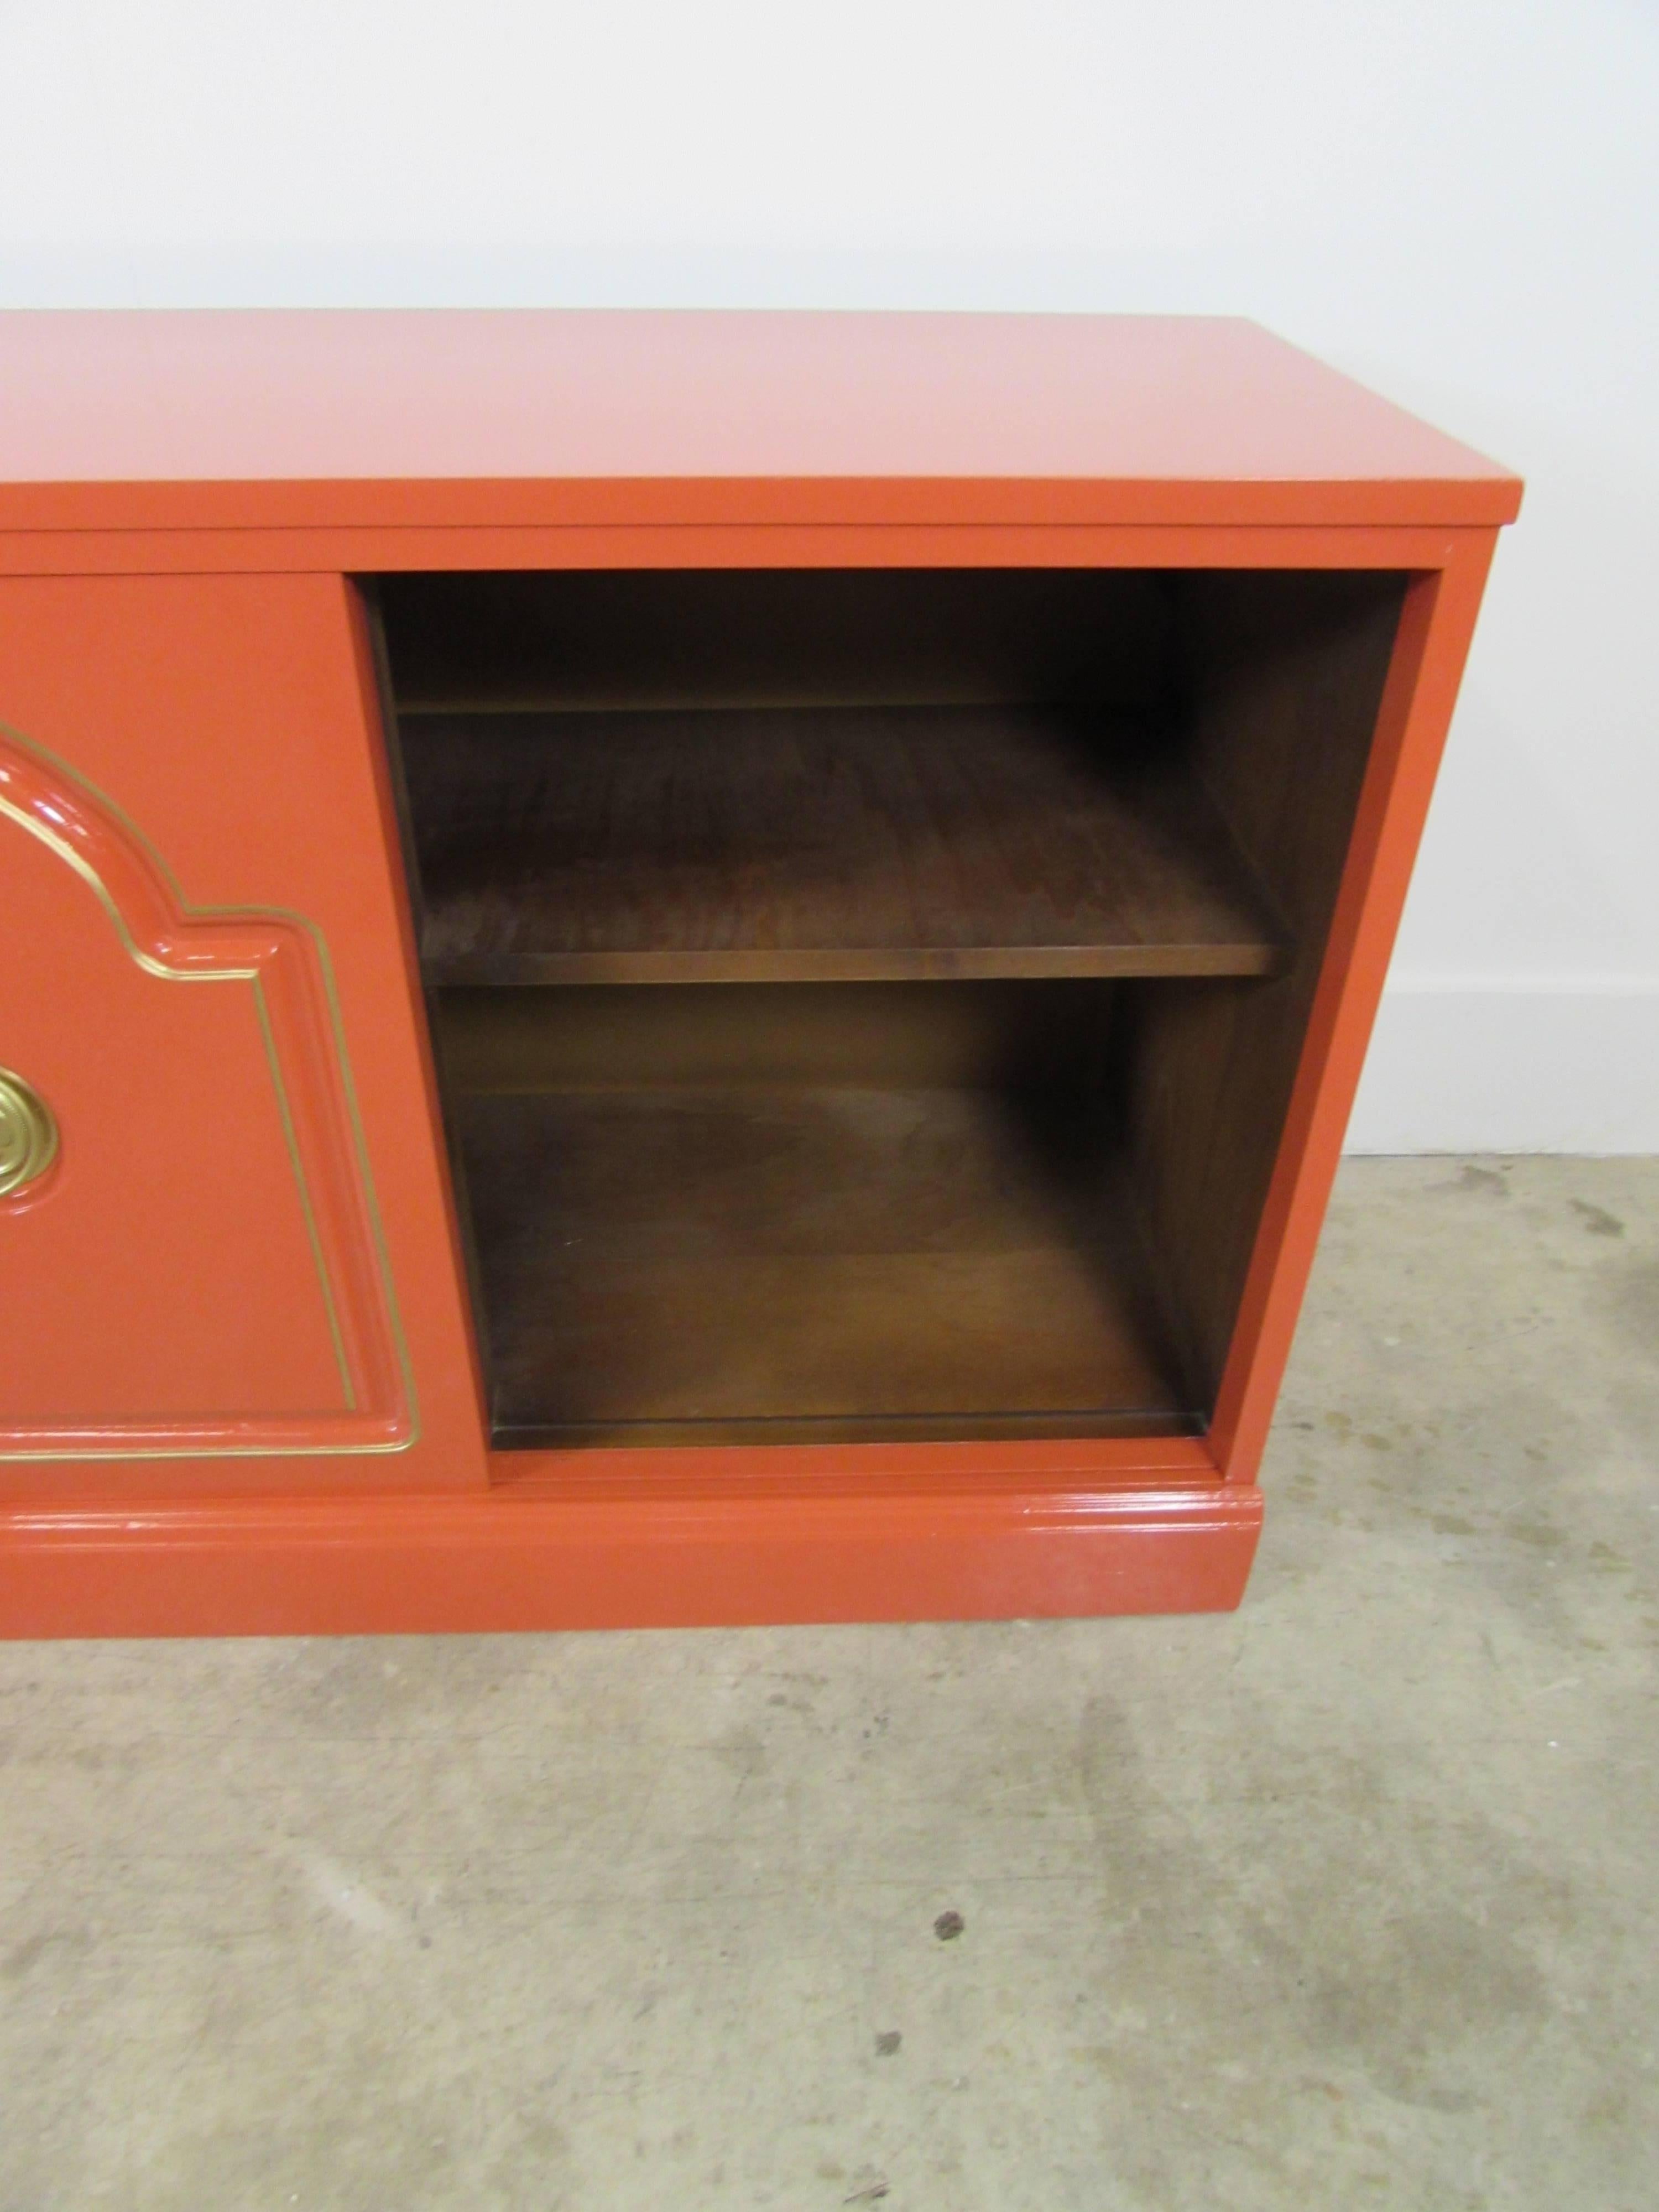 Lacquered Dorothy Draper Style Media Cabinet